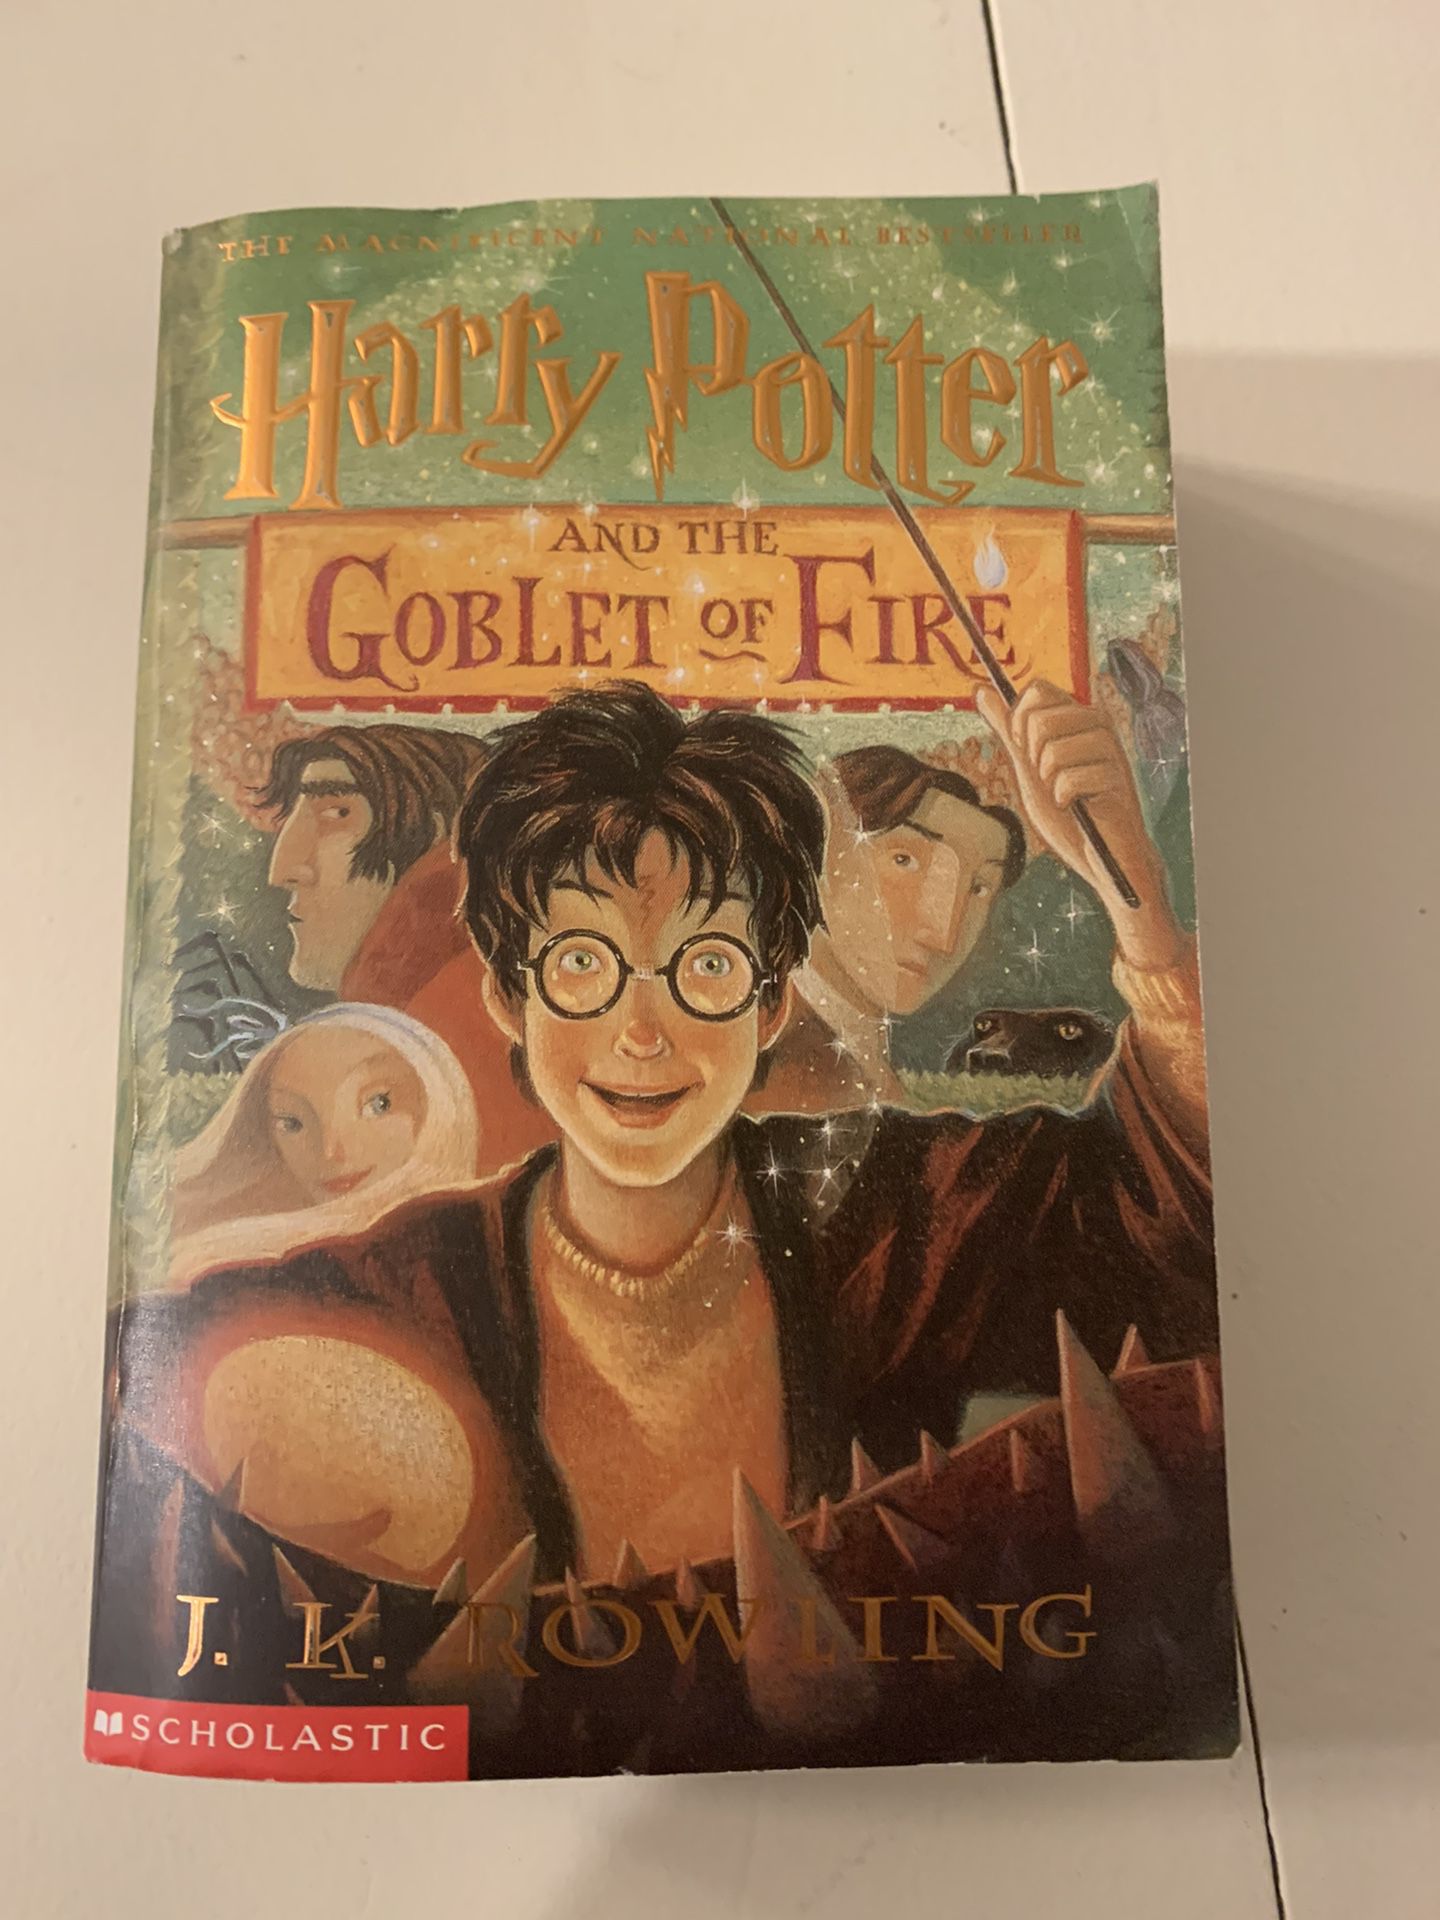 Harry Potter Goblet of Fire Book